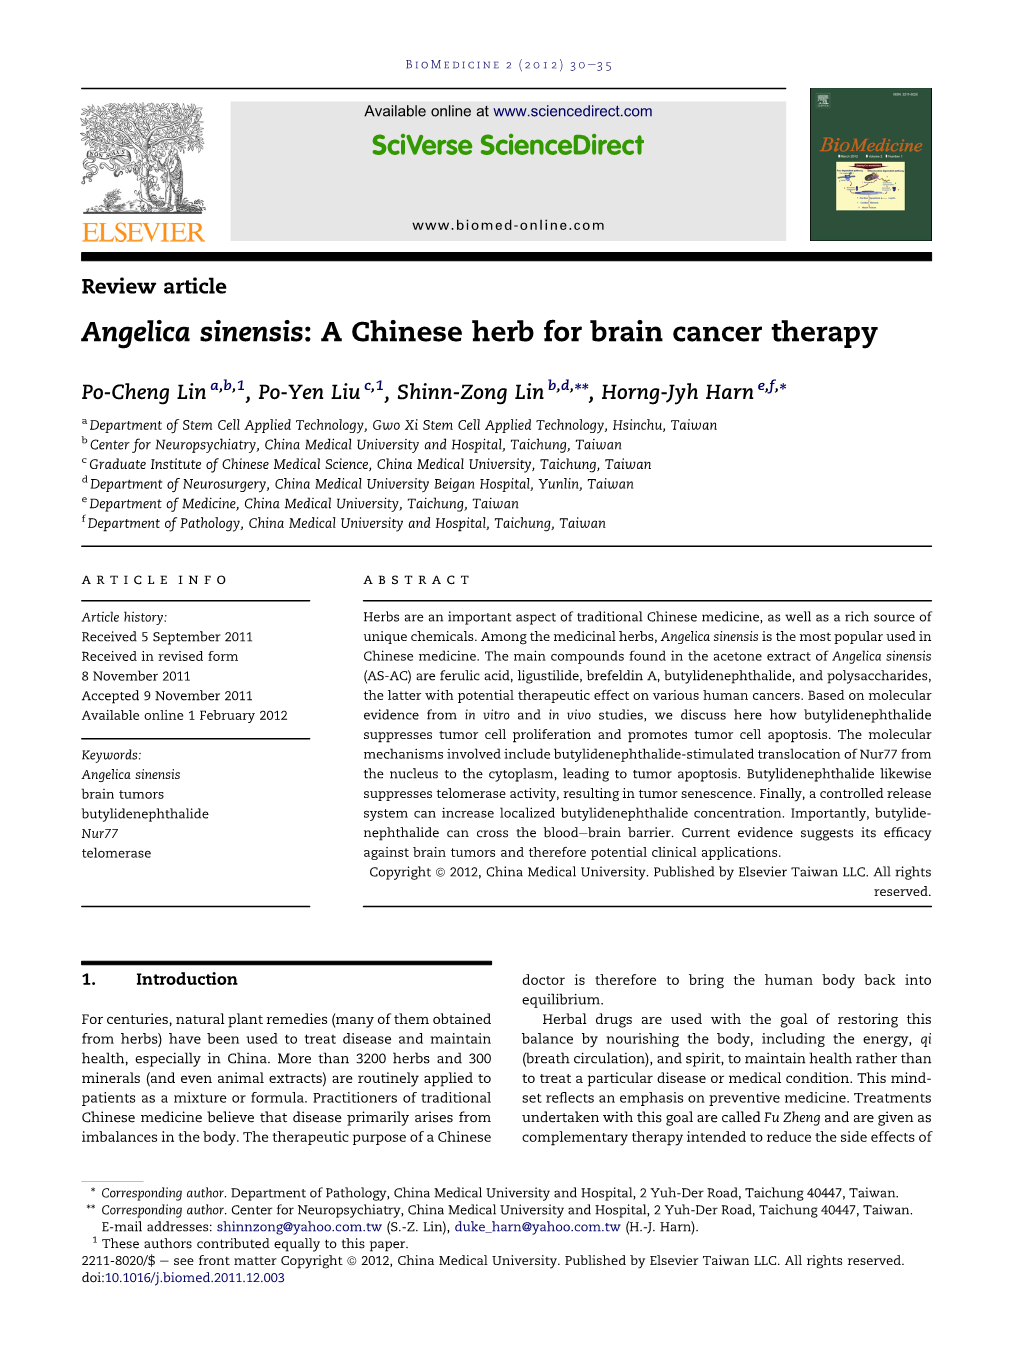 Angelica Sinensis: a Chinese Herb for Brain Cancer Therapy